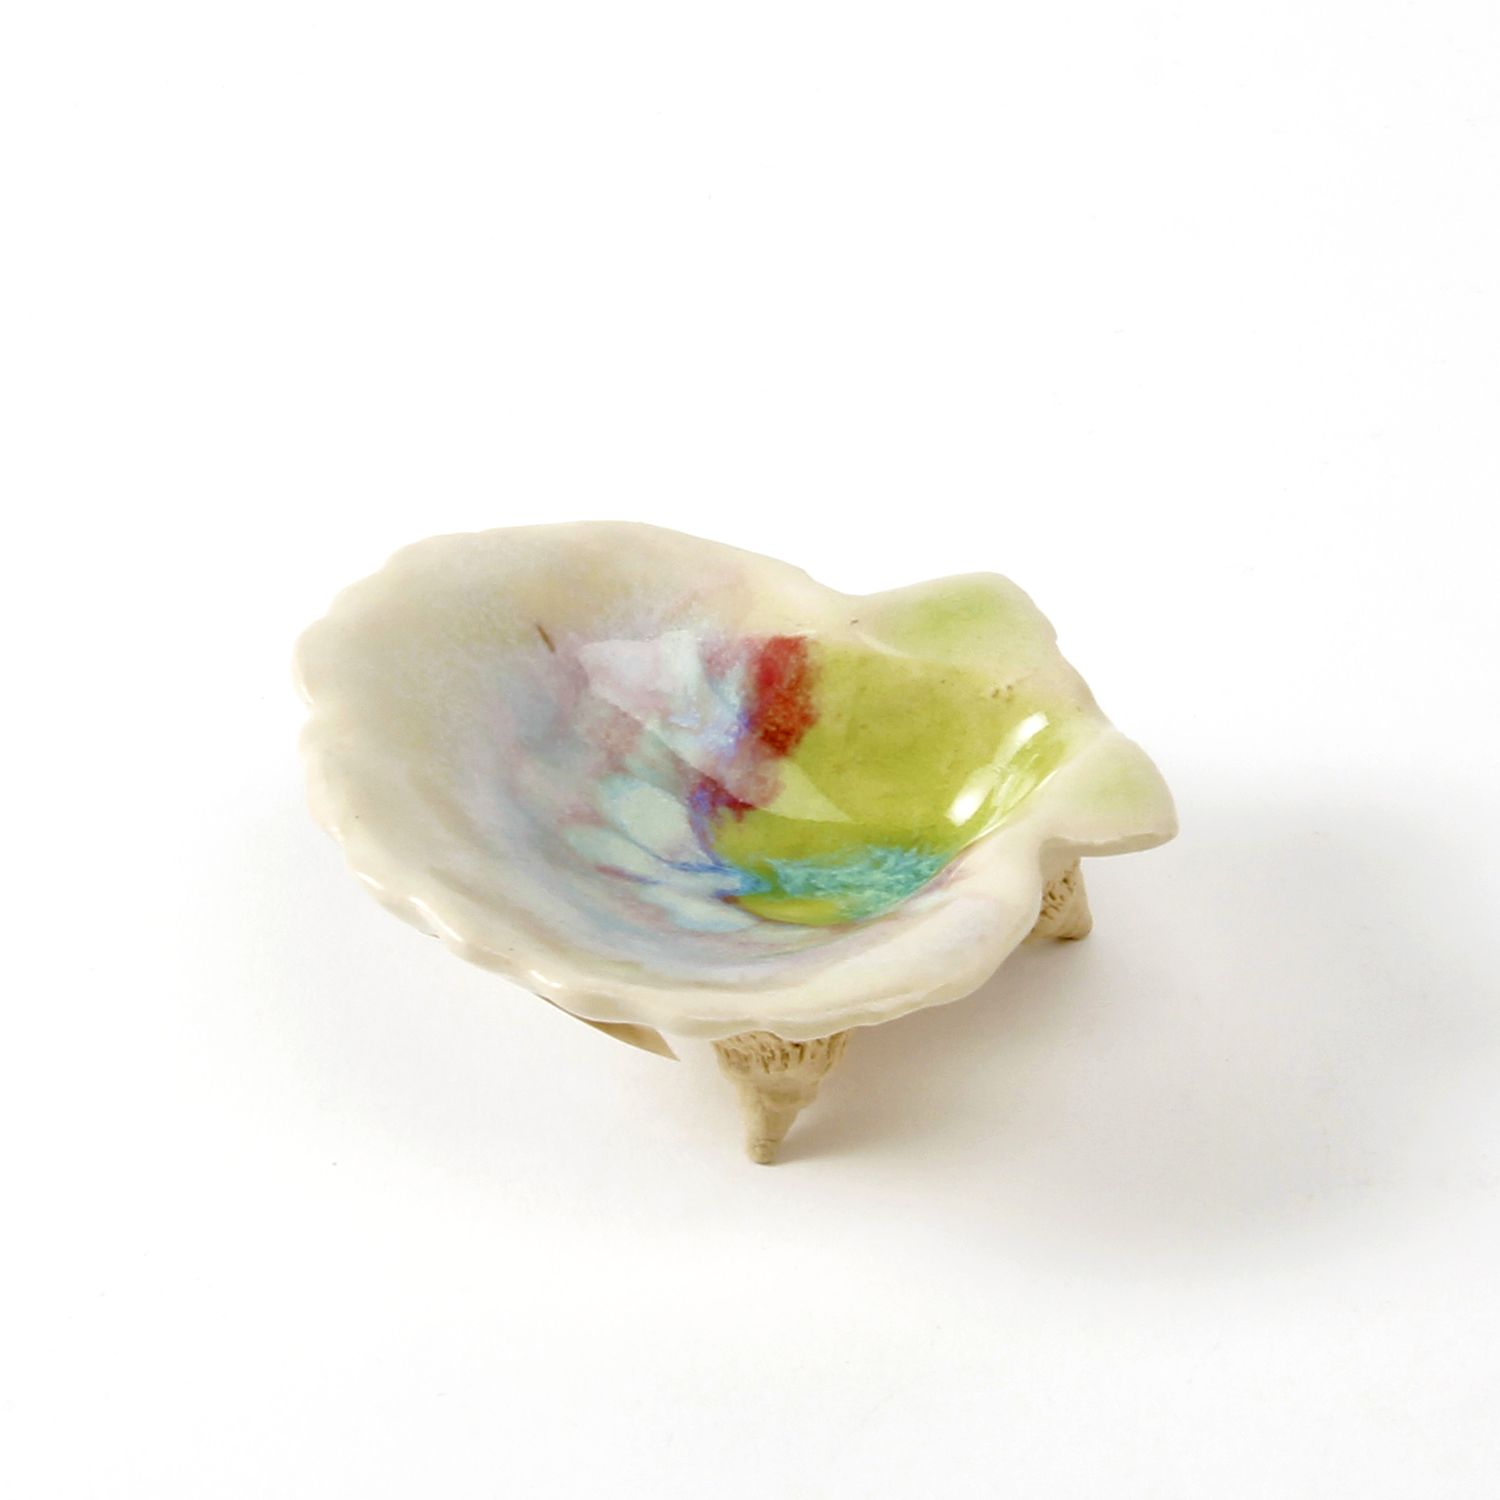 Brenda Nieves: Small Clam Plate Product Image 2 of 4